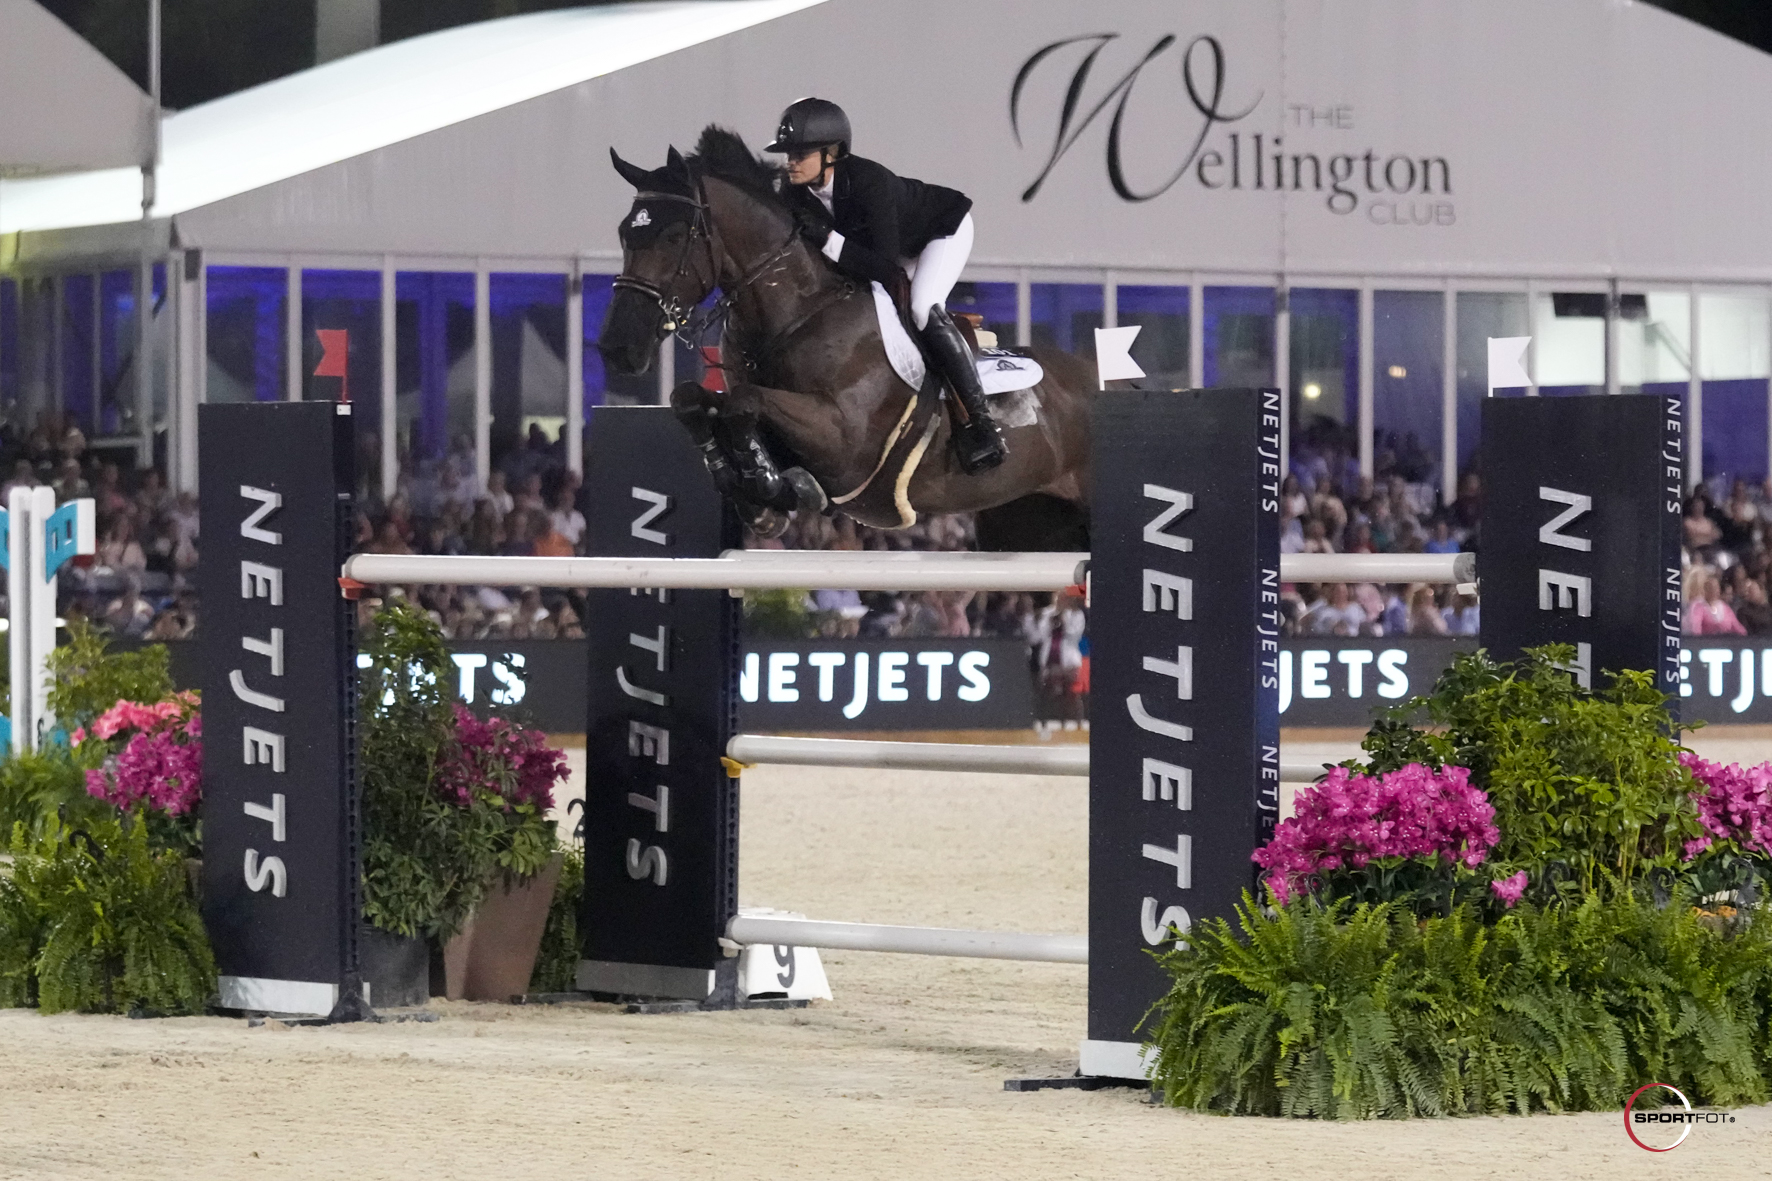 WEF Wellington: A First for Tiffany Foster in NetJets CSI4* Grand Prix - "I'm really happy to finally check this one off"